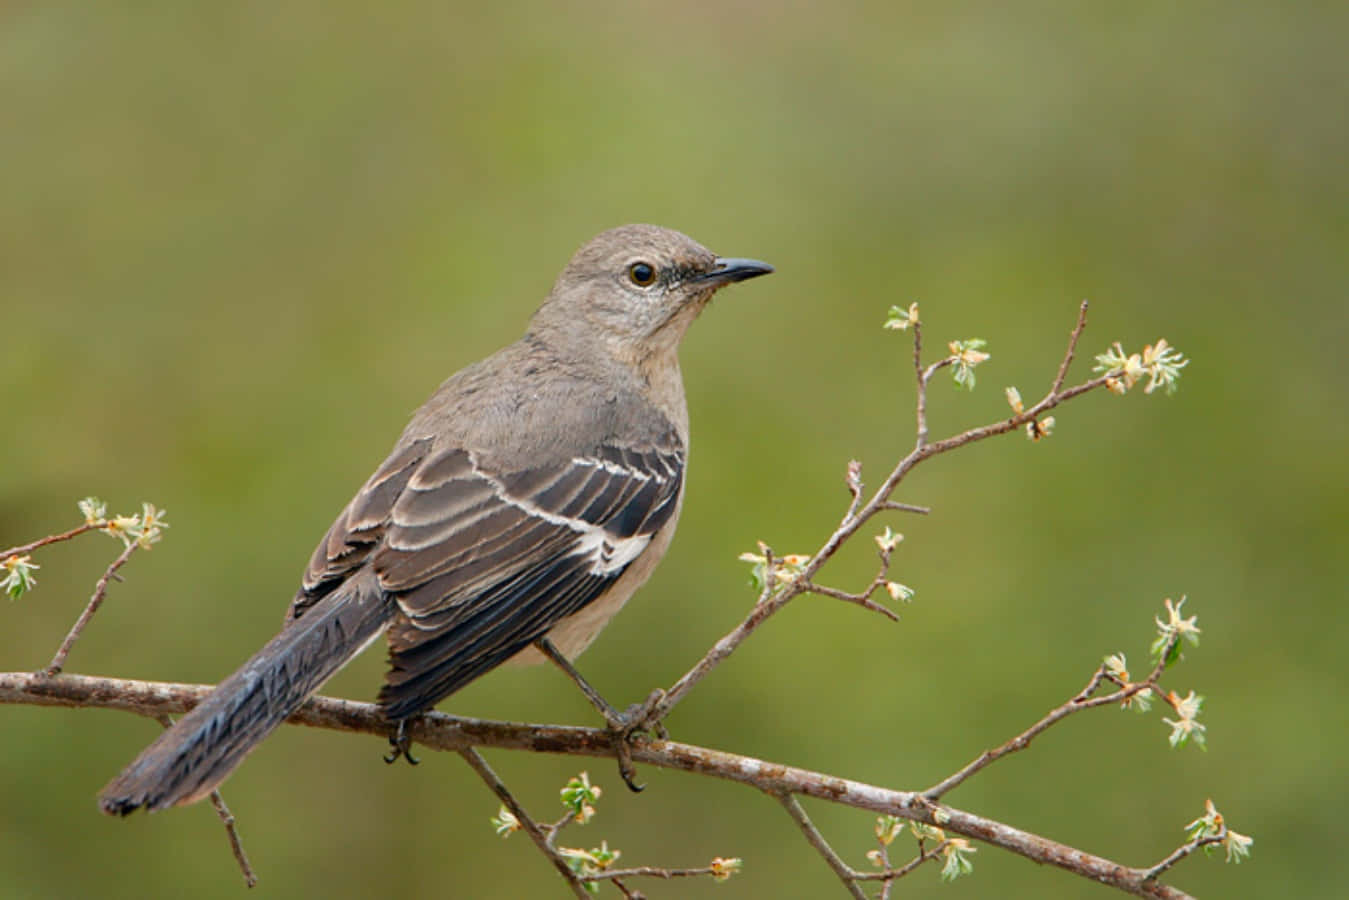 A Mockingbird perched on an old tree